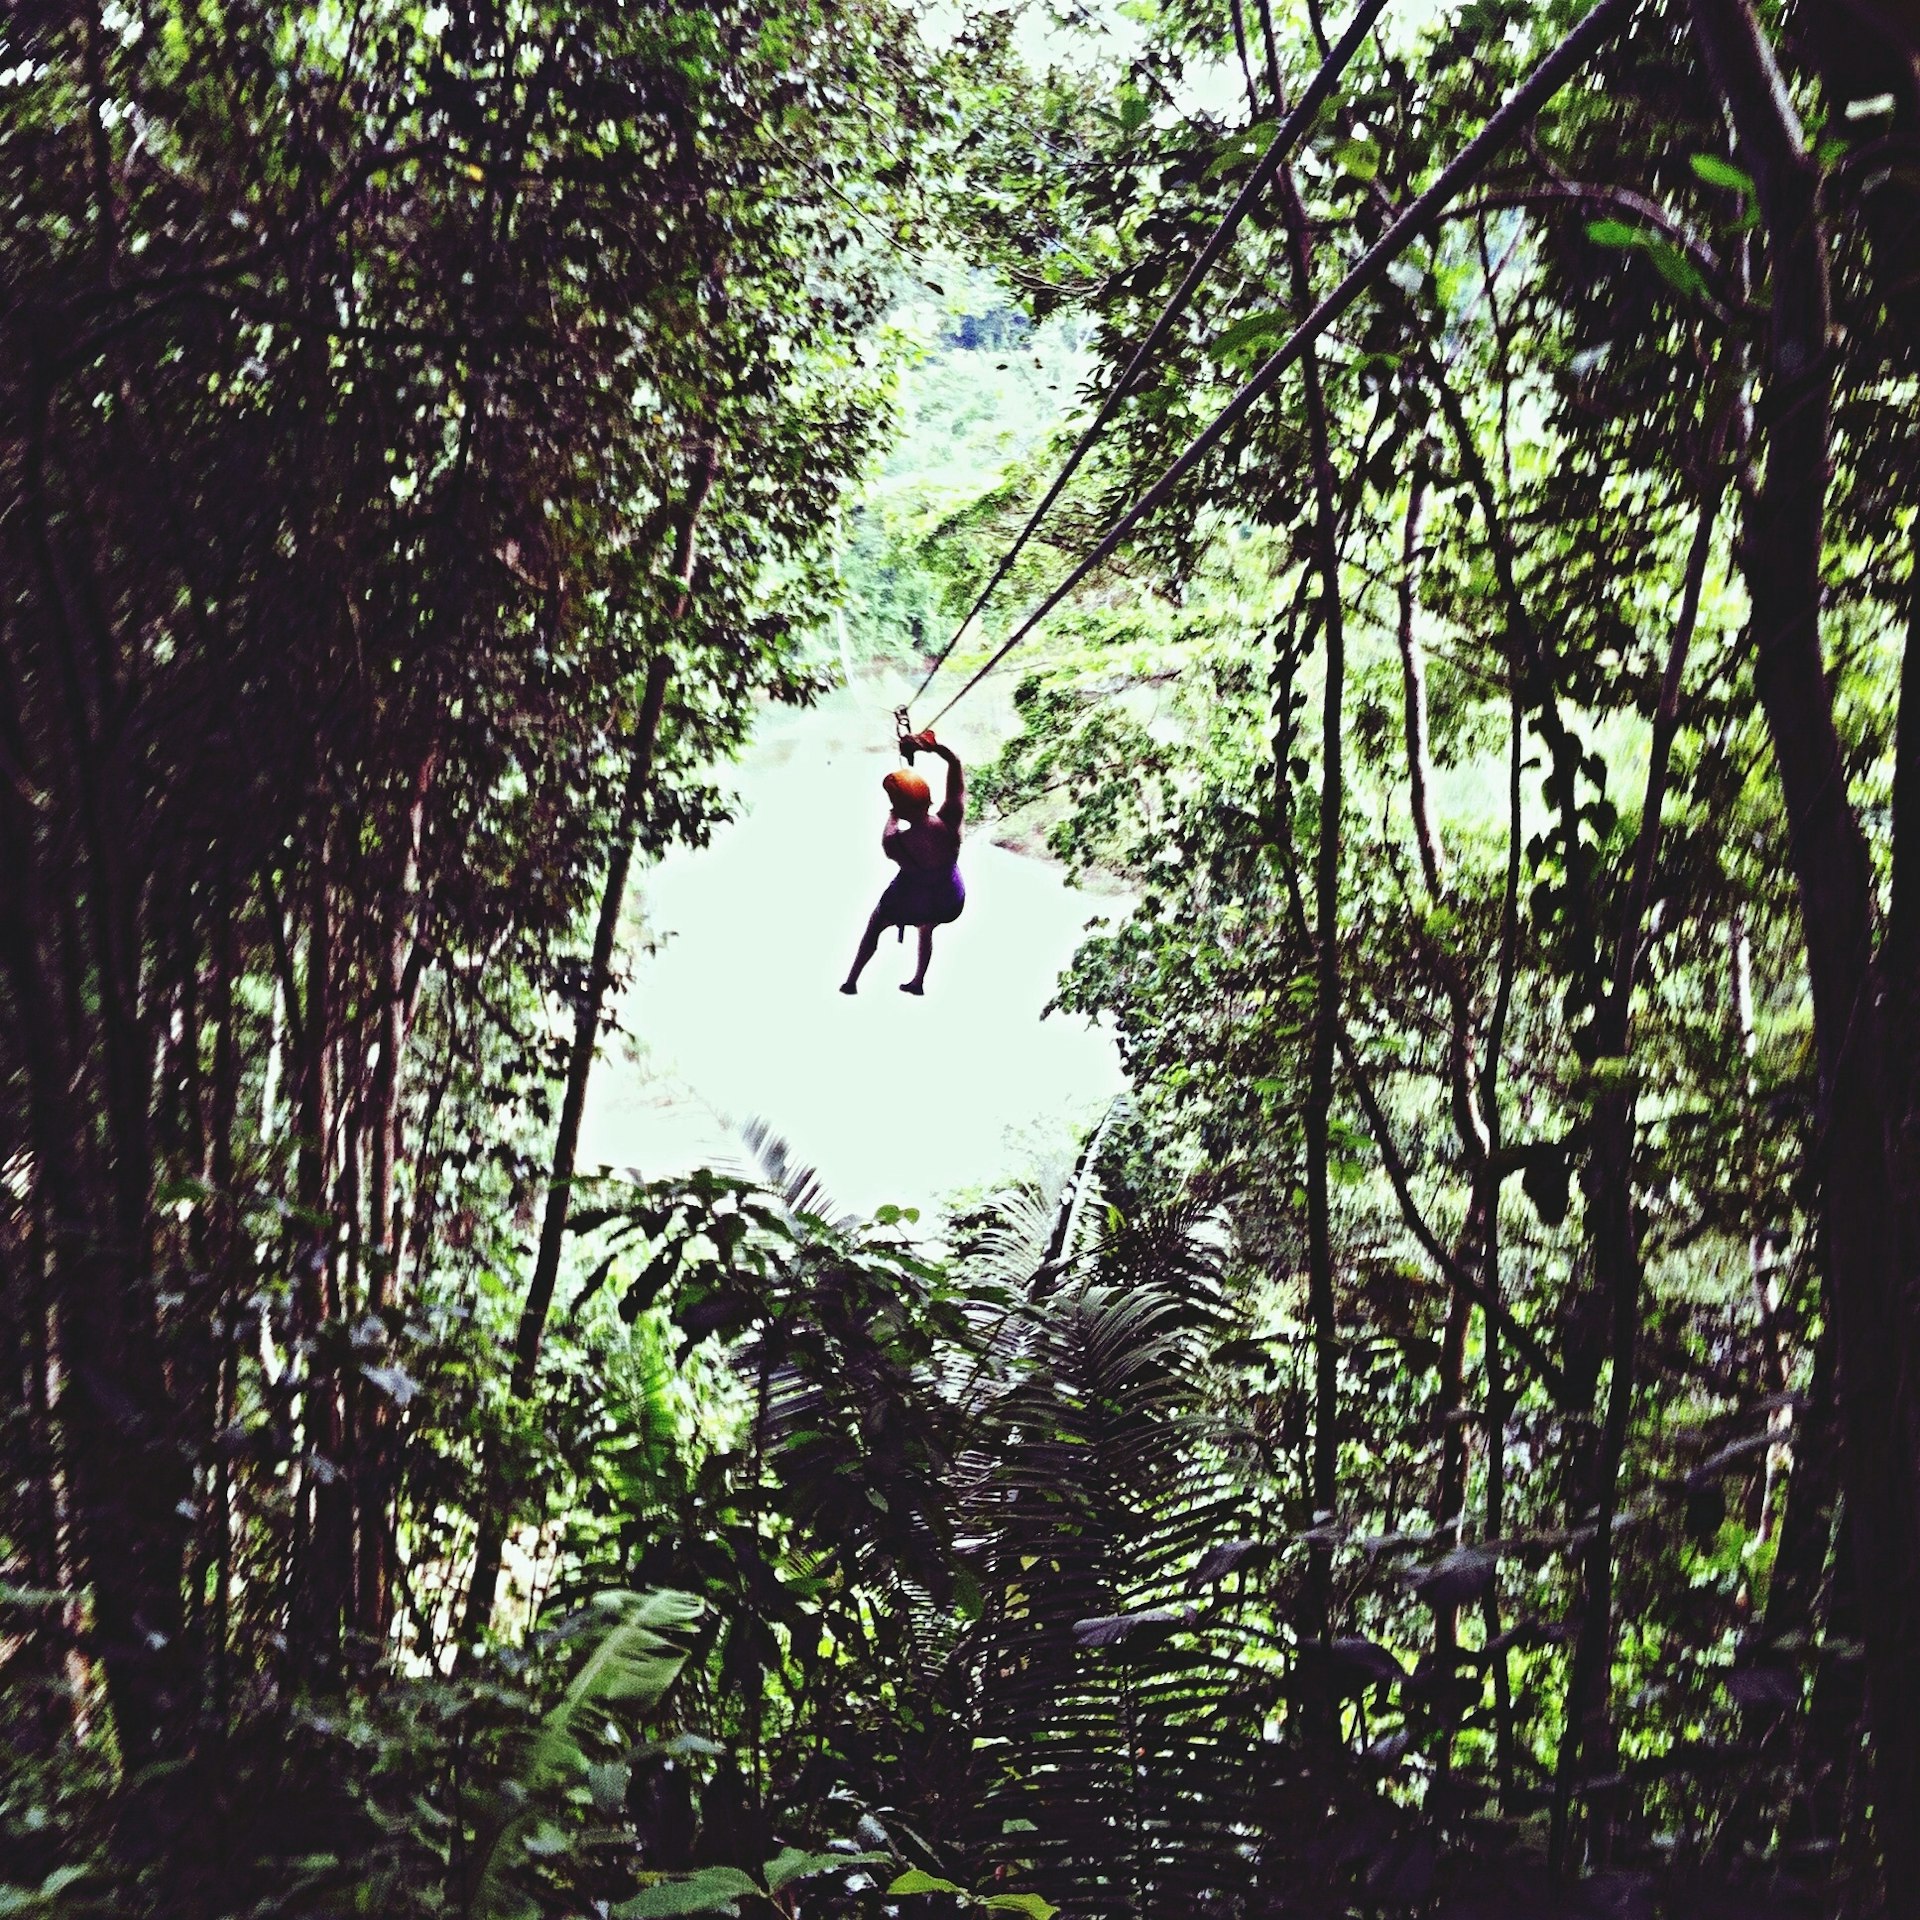 A woman zoom though the tree canopy and out a hole while flying on a zipline.